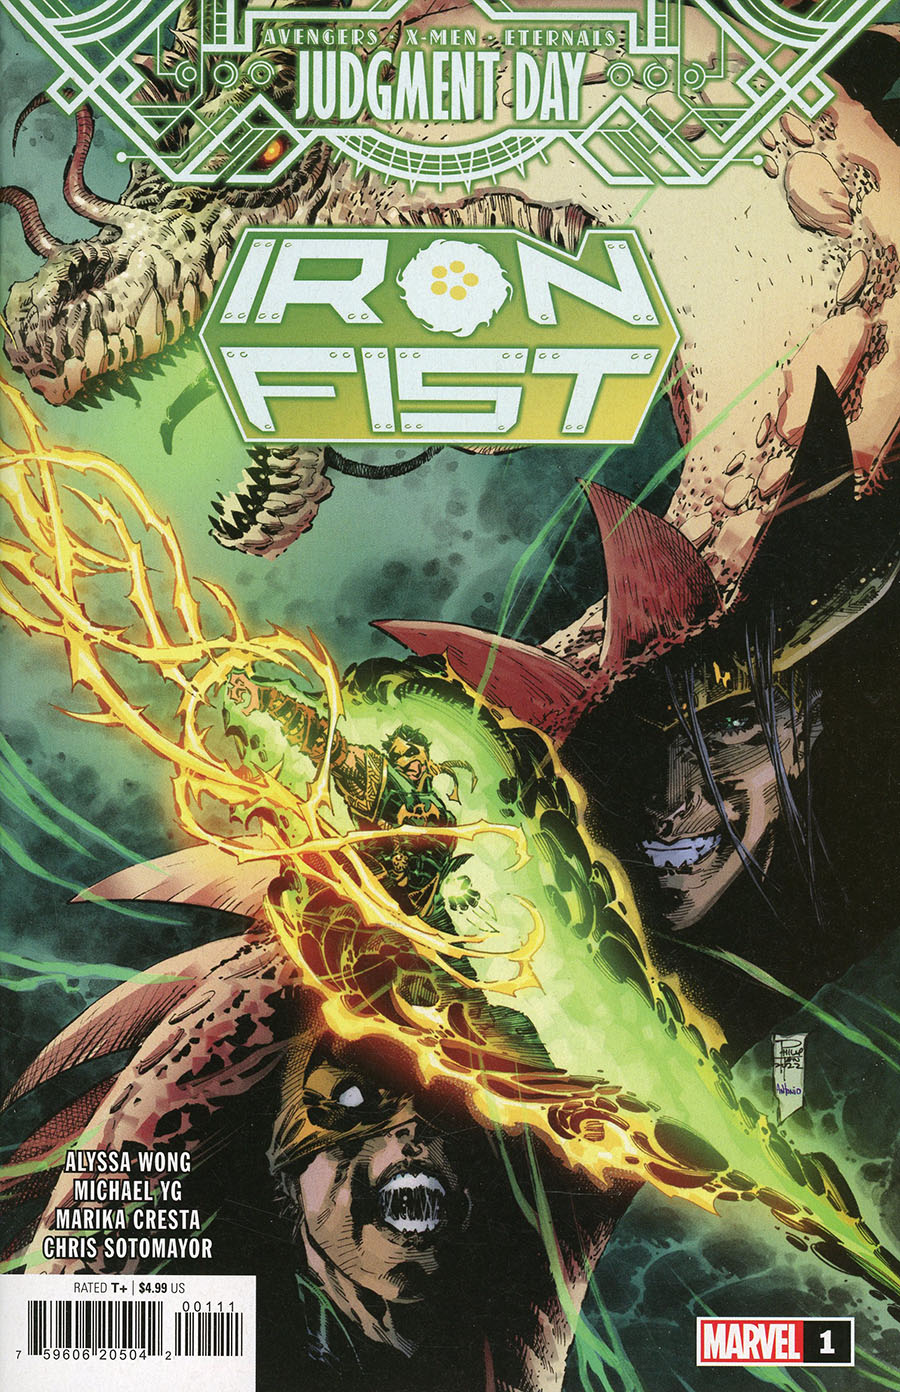 A.X.E. Iron Fist #1 (One Shot) Cover A Regular Philip Tan Cover (A.X.E. Judgment Day Tie-In)